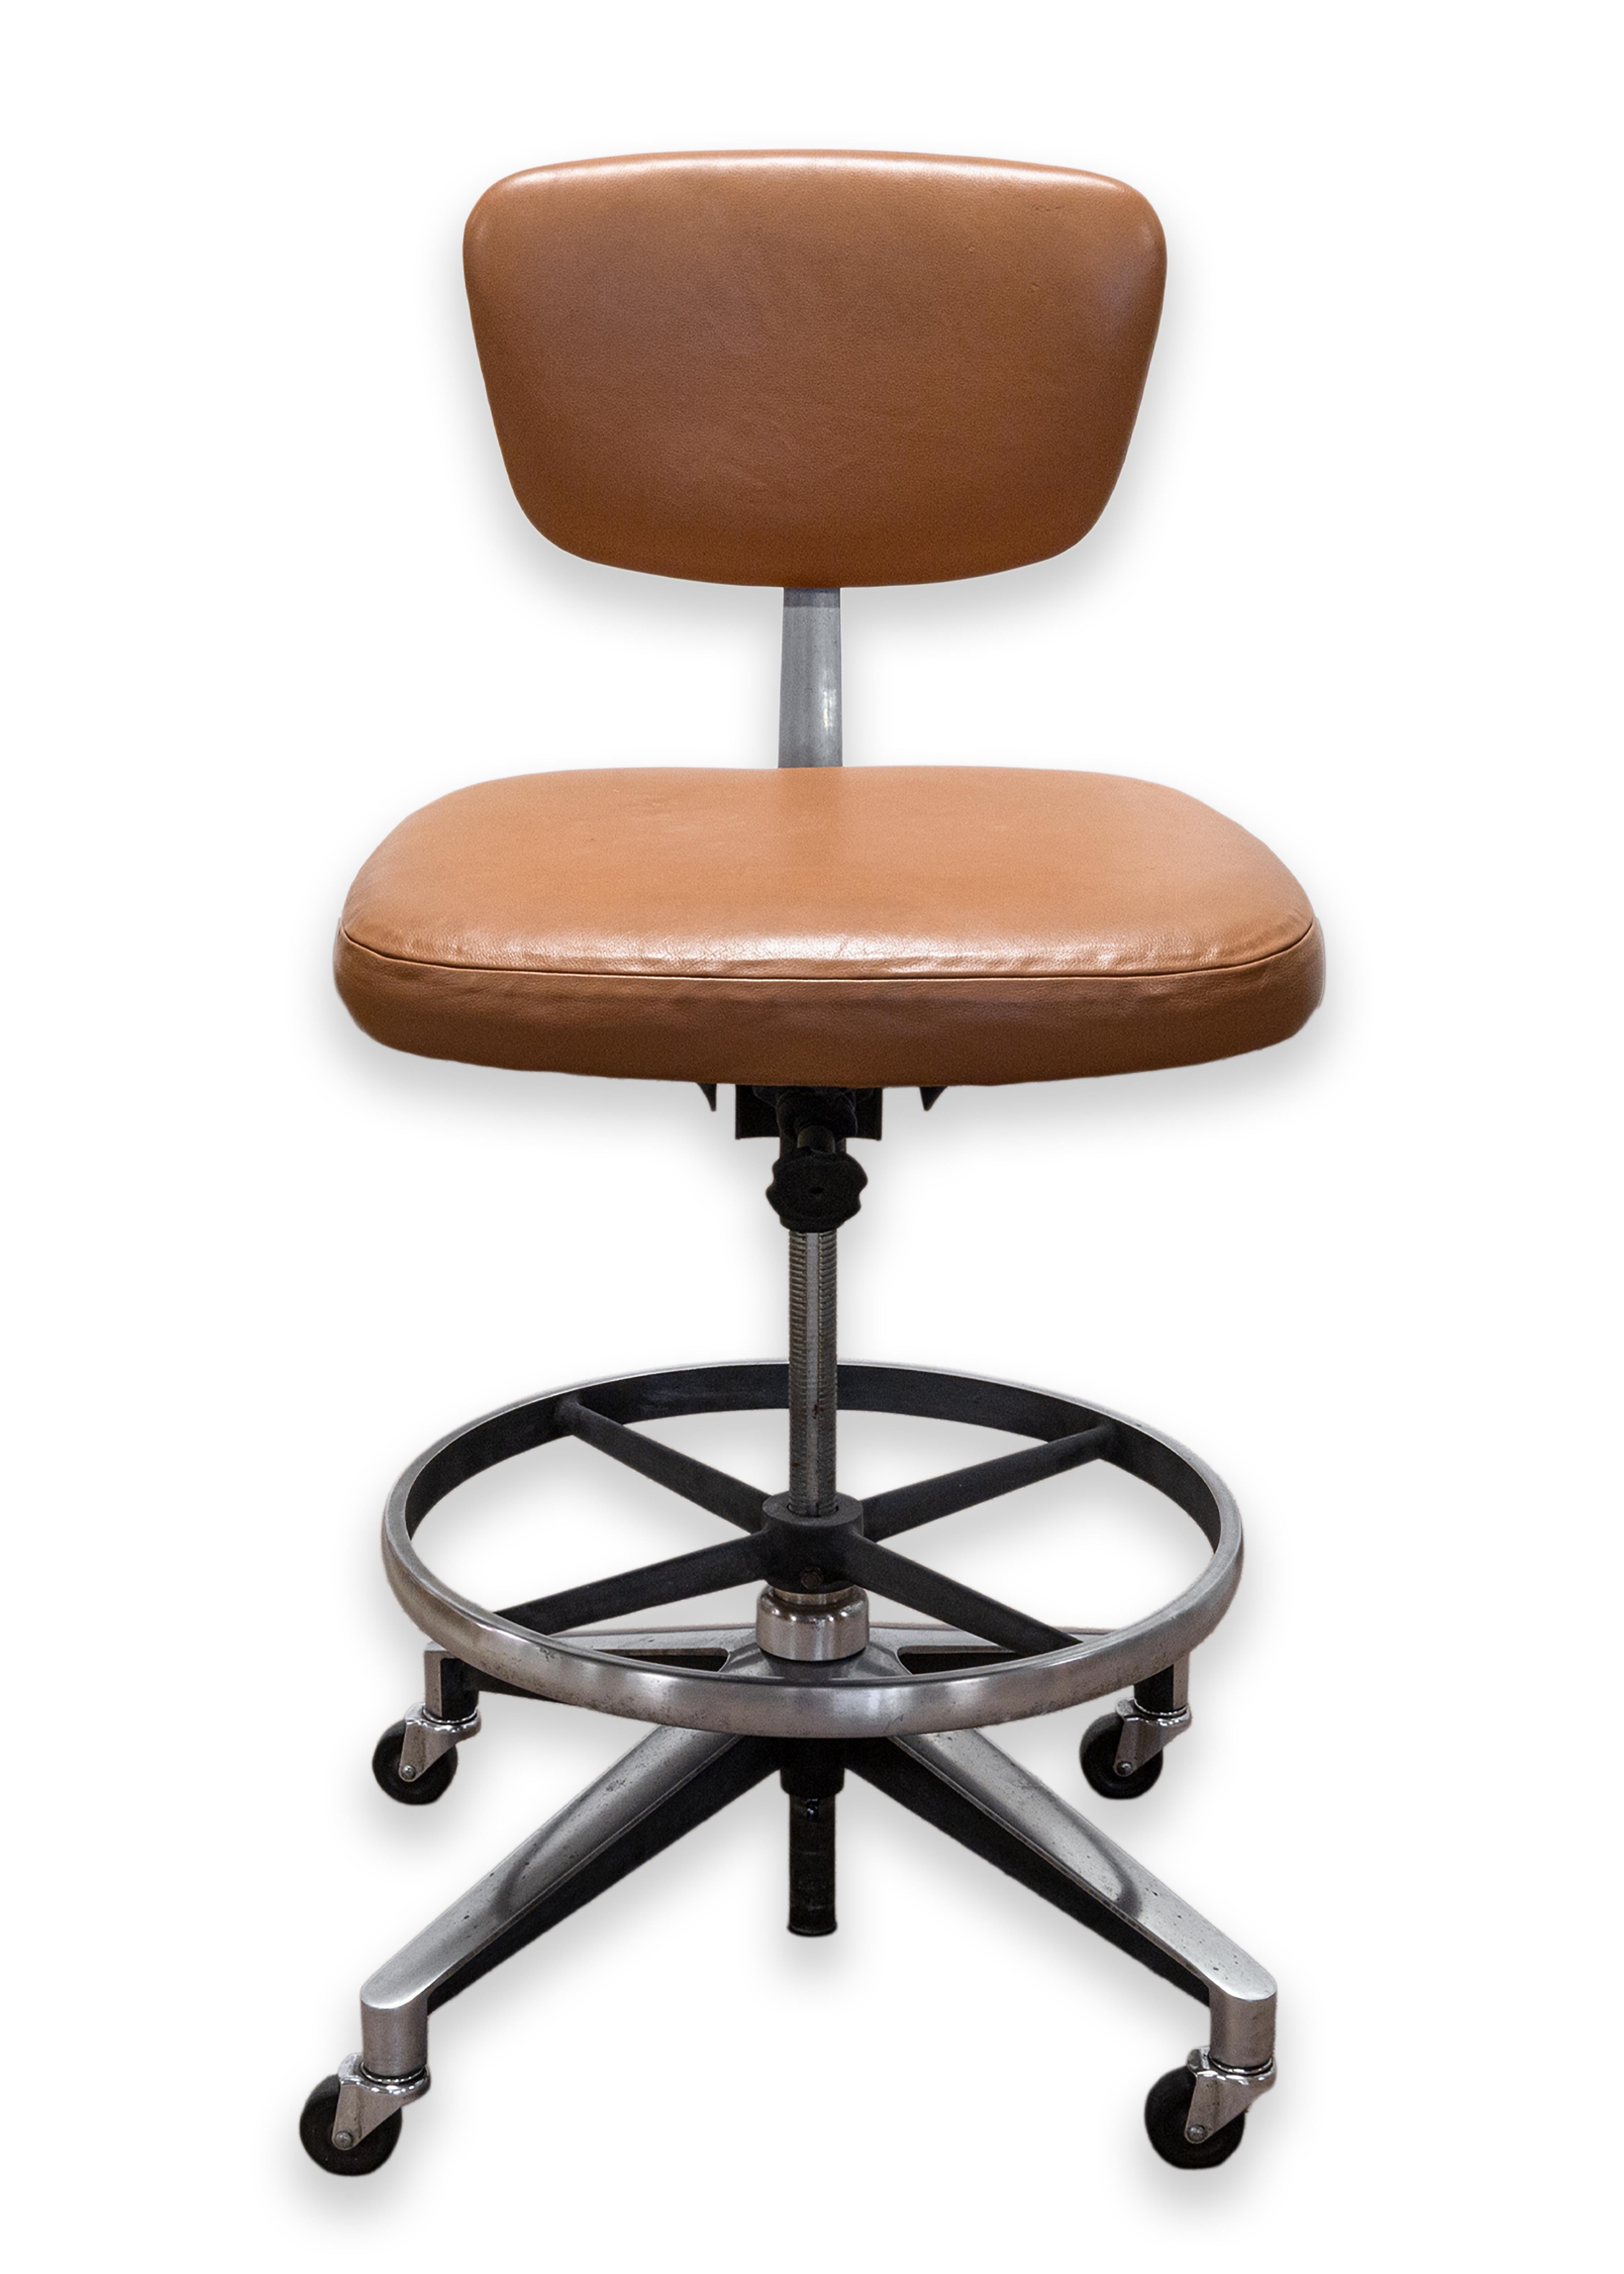  A rare drafting stool designed by renowned architect and designer Eero Saarinen for Knoll, 1956. Model 77 S of the 70 series. Original light brown leather upholstery with a chrome pedestal, x-form base, and circular footrest. An adjustable seat for